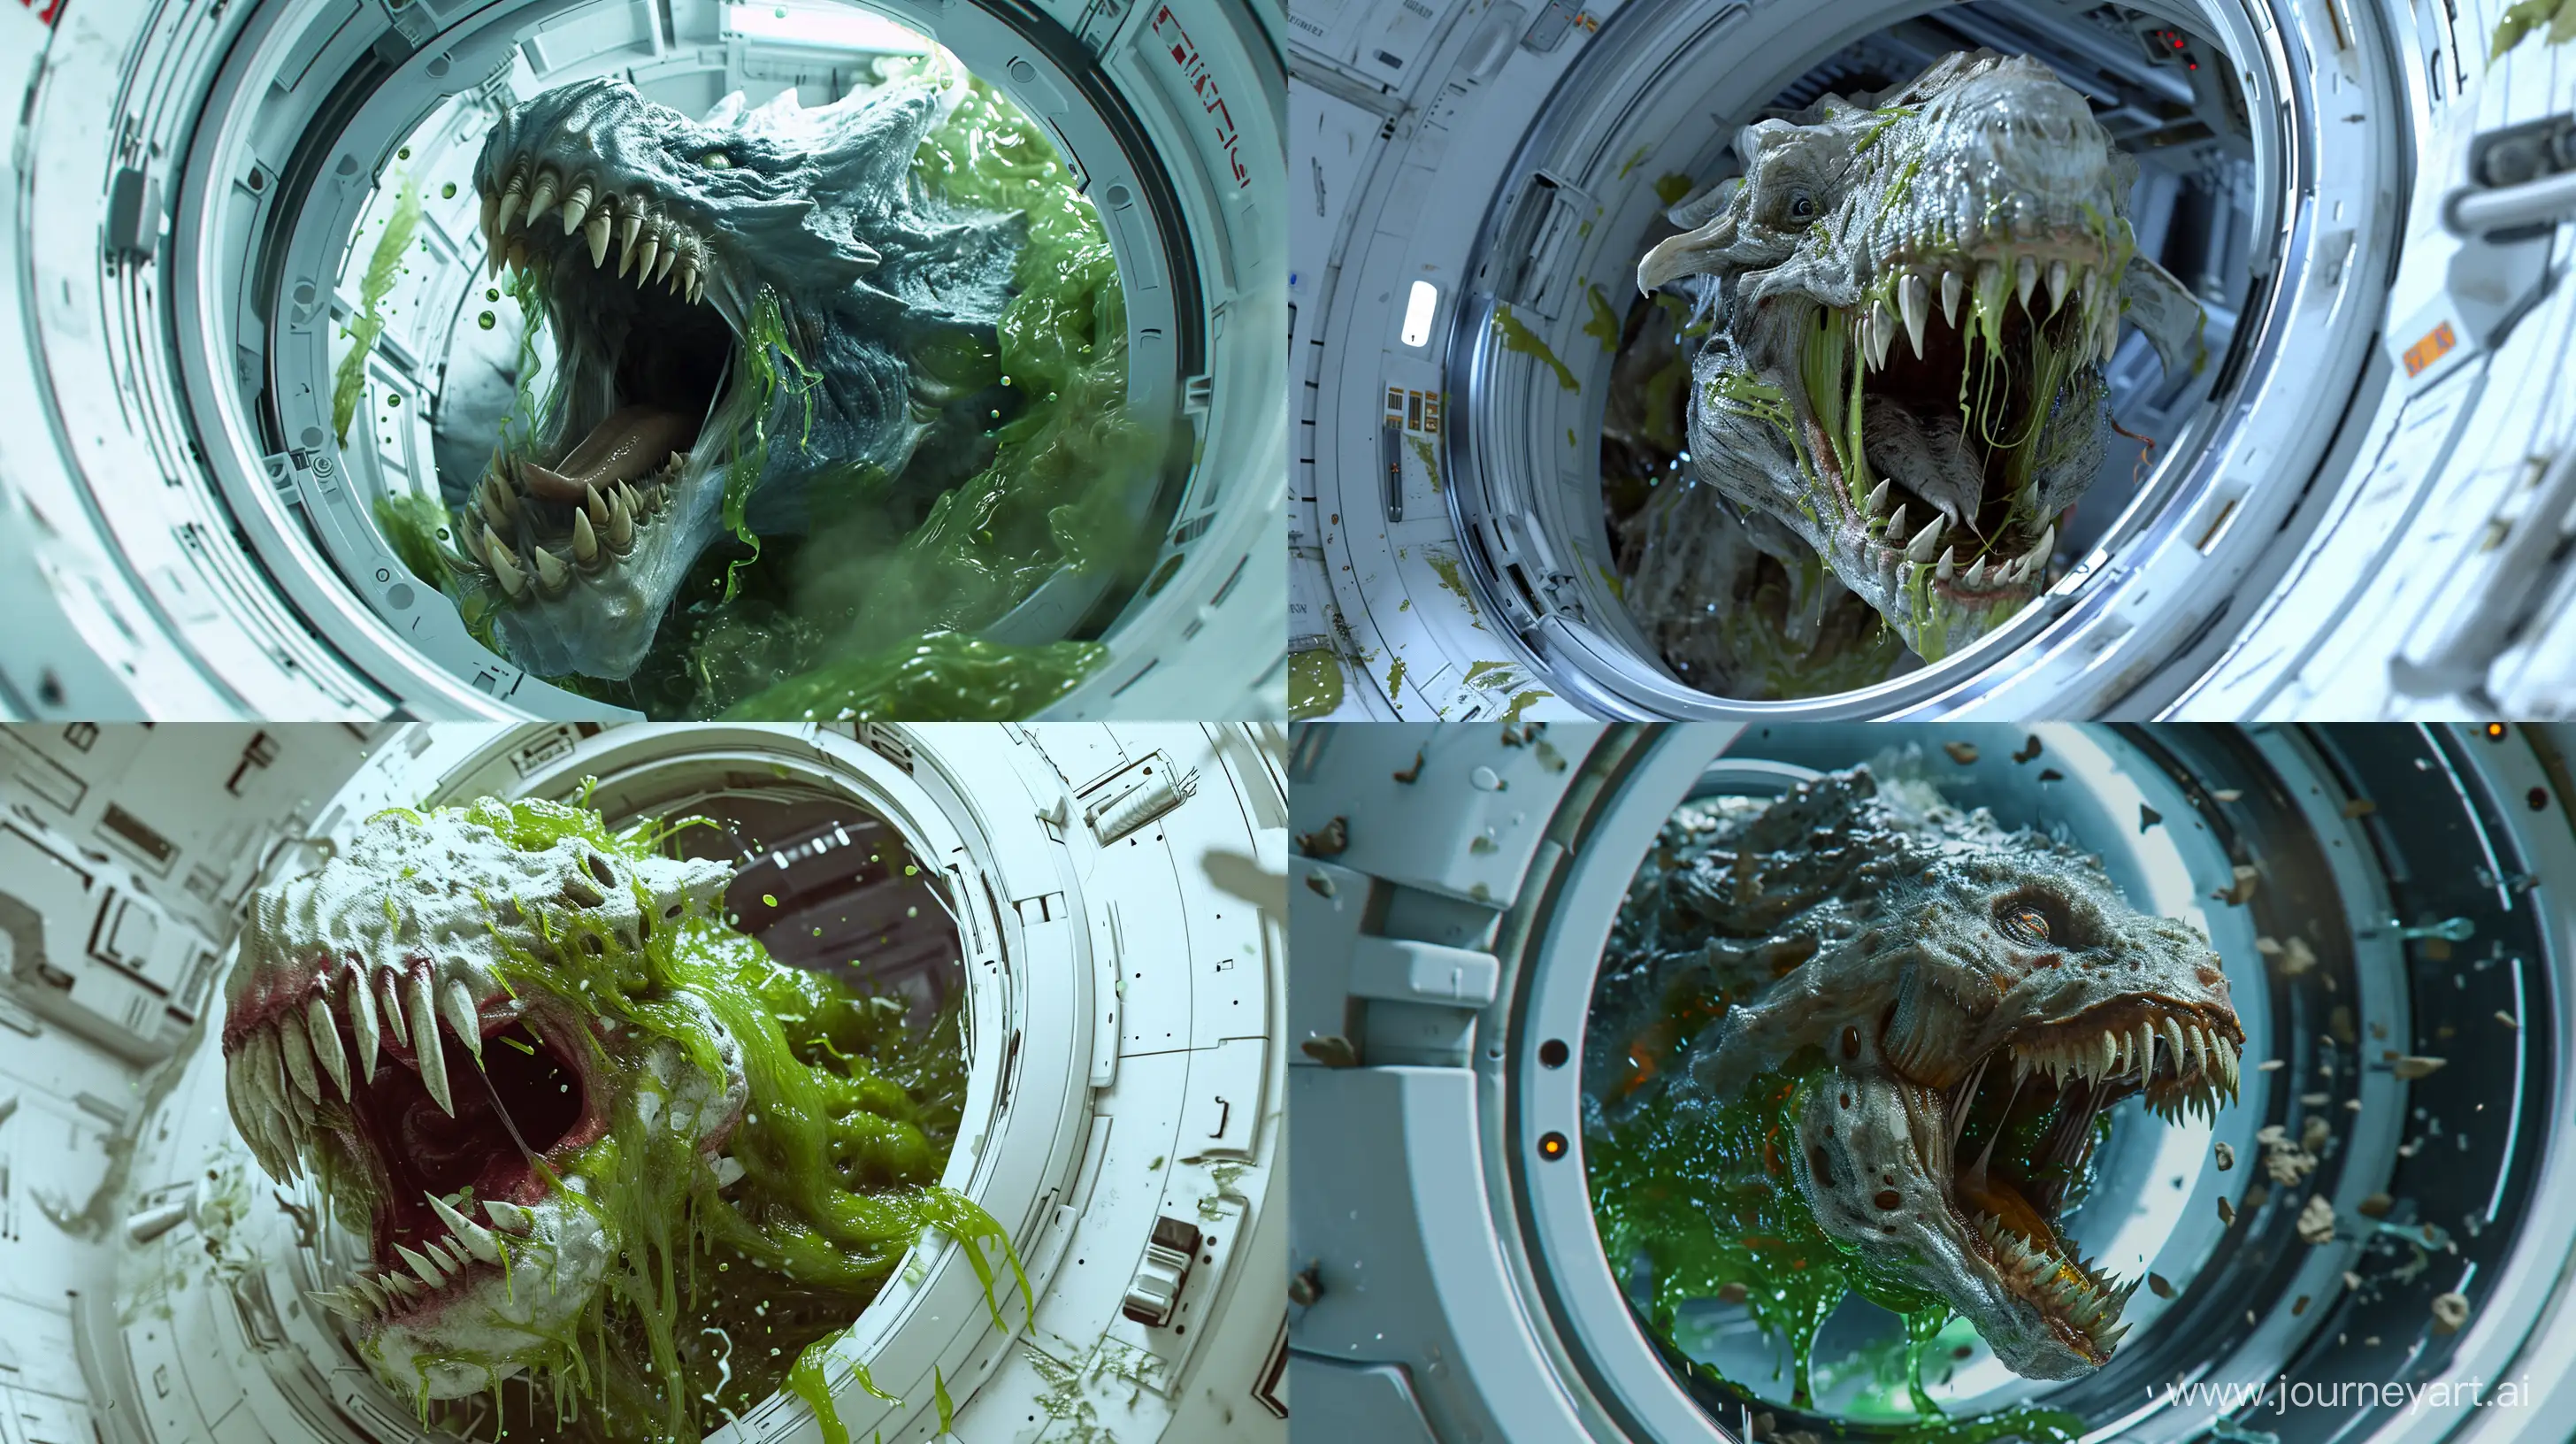 Otherworldly-Encounter-Terrifying-Cosmic-Beast-Emerges-in-Pristine-Space-Station